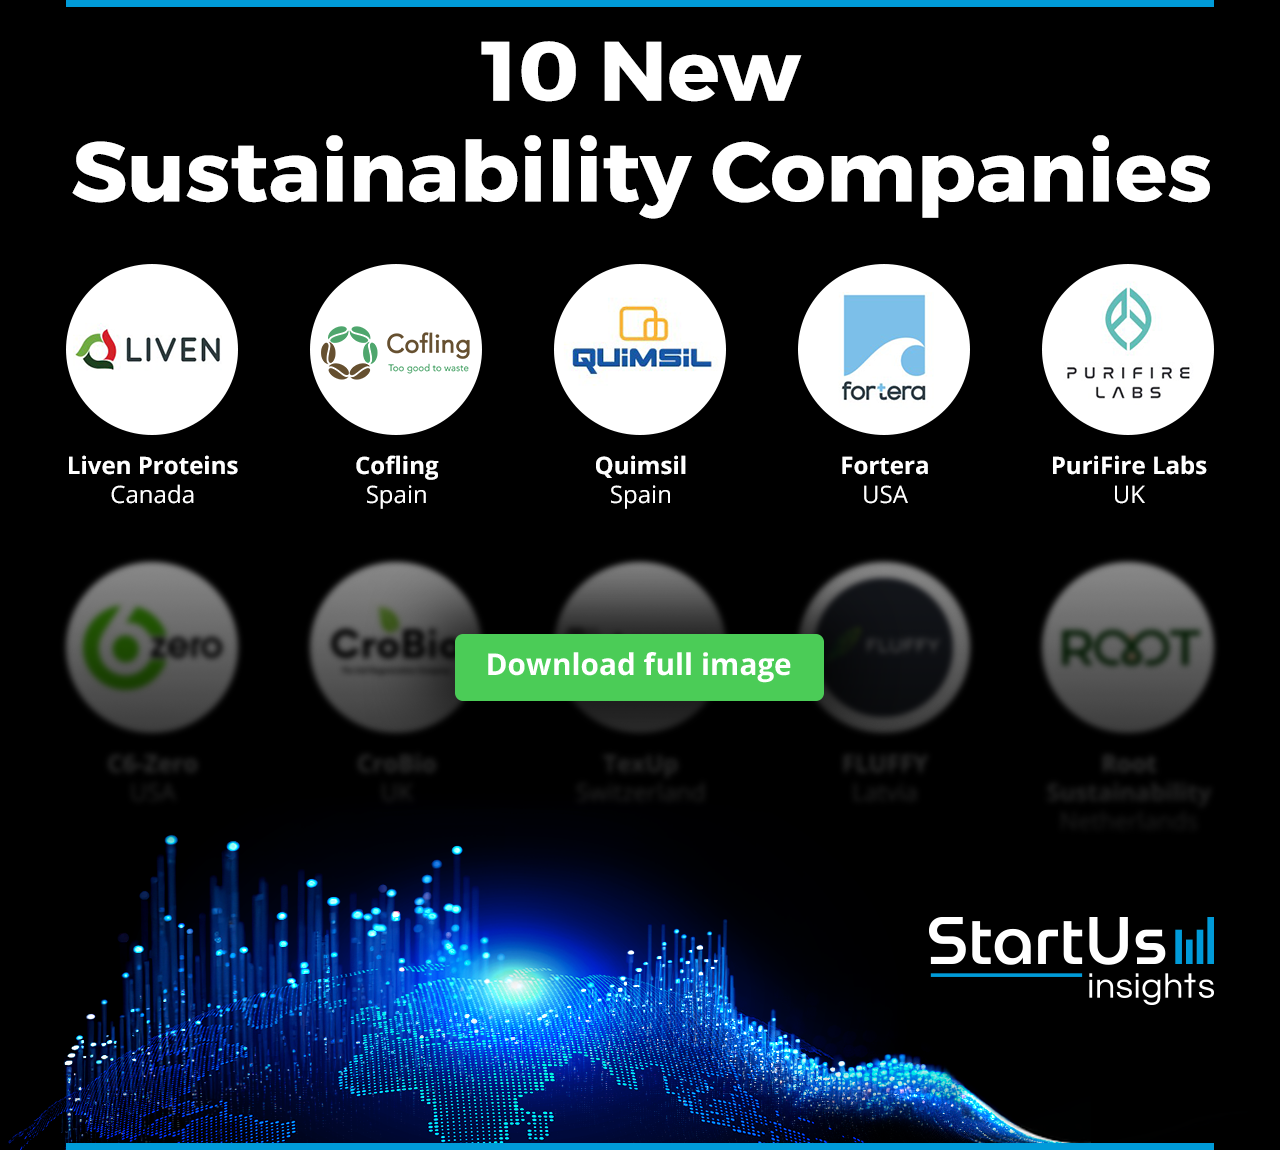 New-Sustainability-Companies-Logos-Blurred-StartUs-Insights-noresize